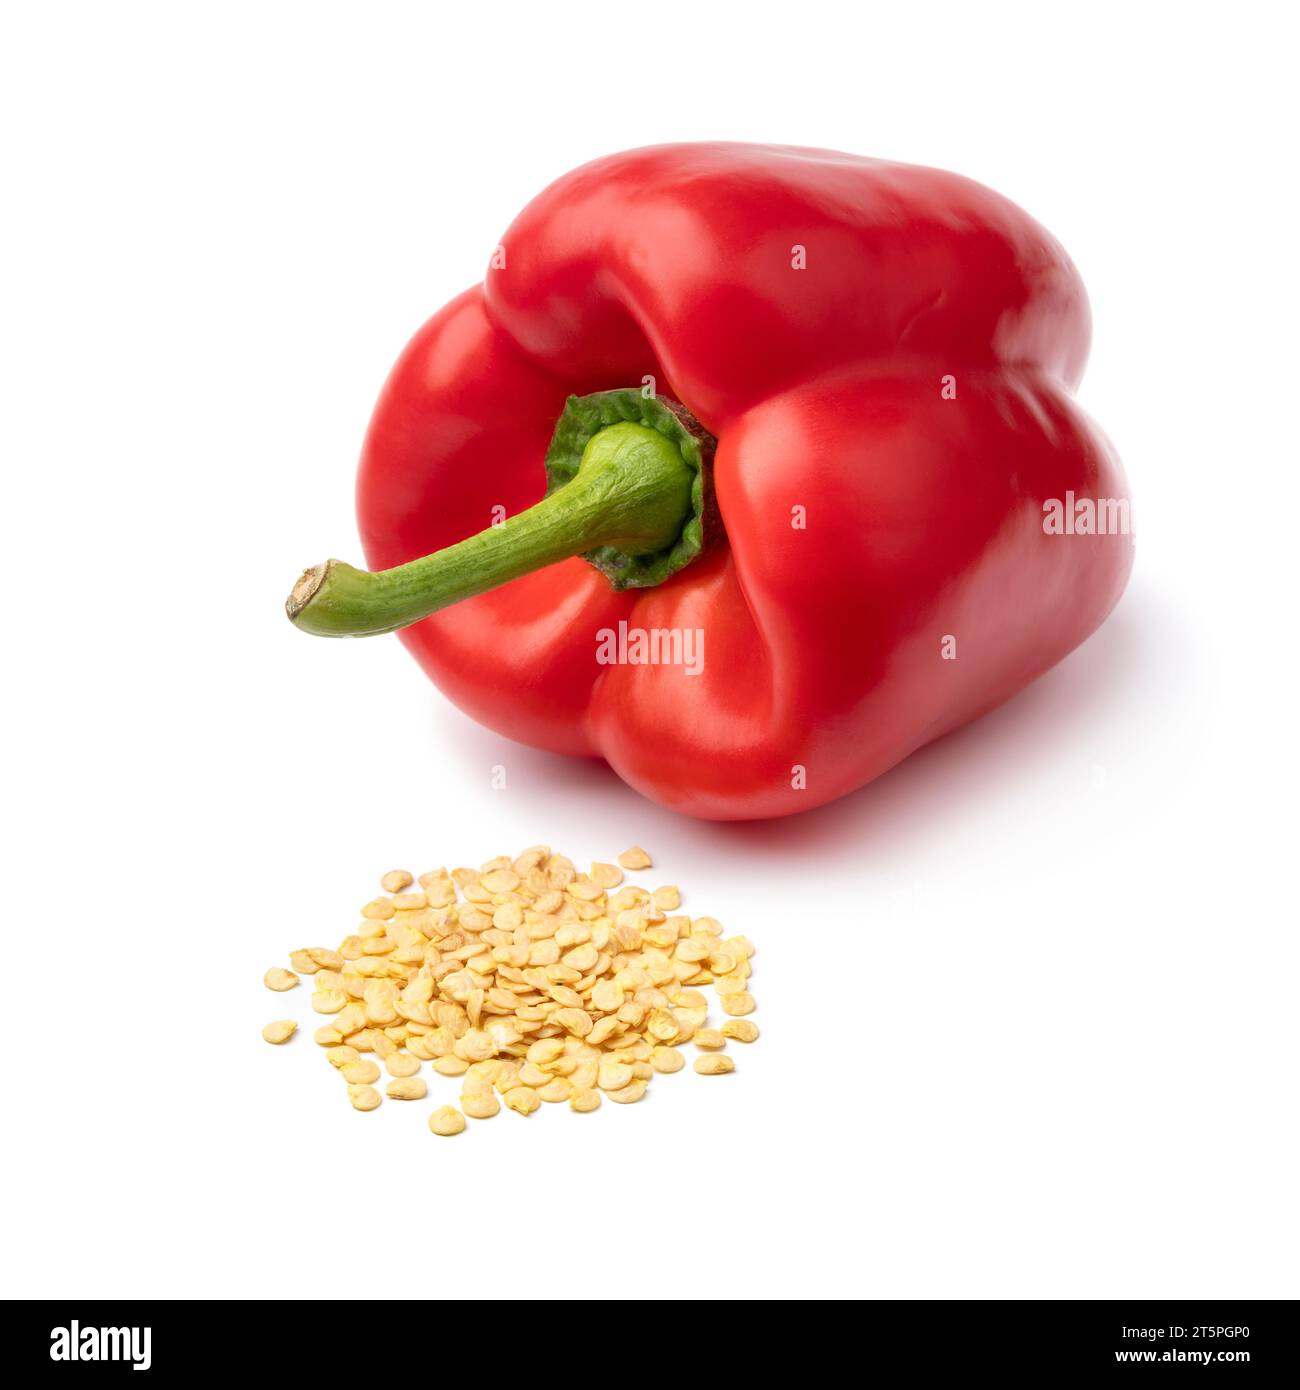 Fresh red bell pepper and a heap of seed in front isolated on white background close up Stock Photo